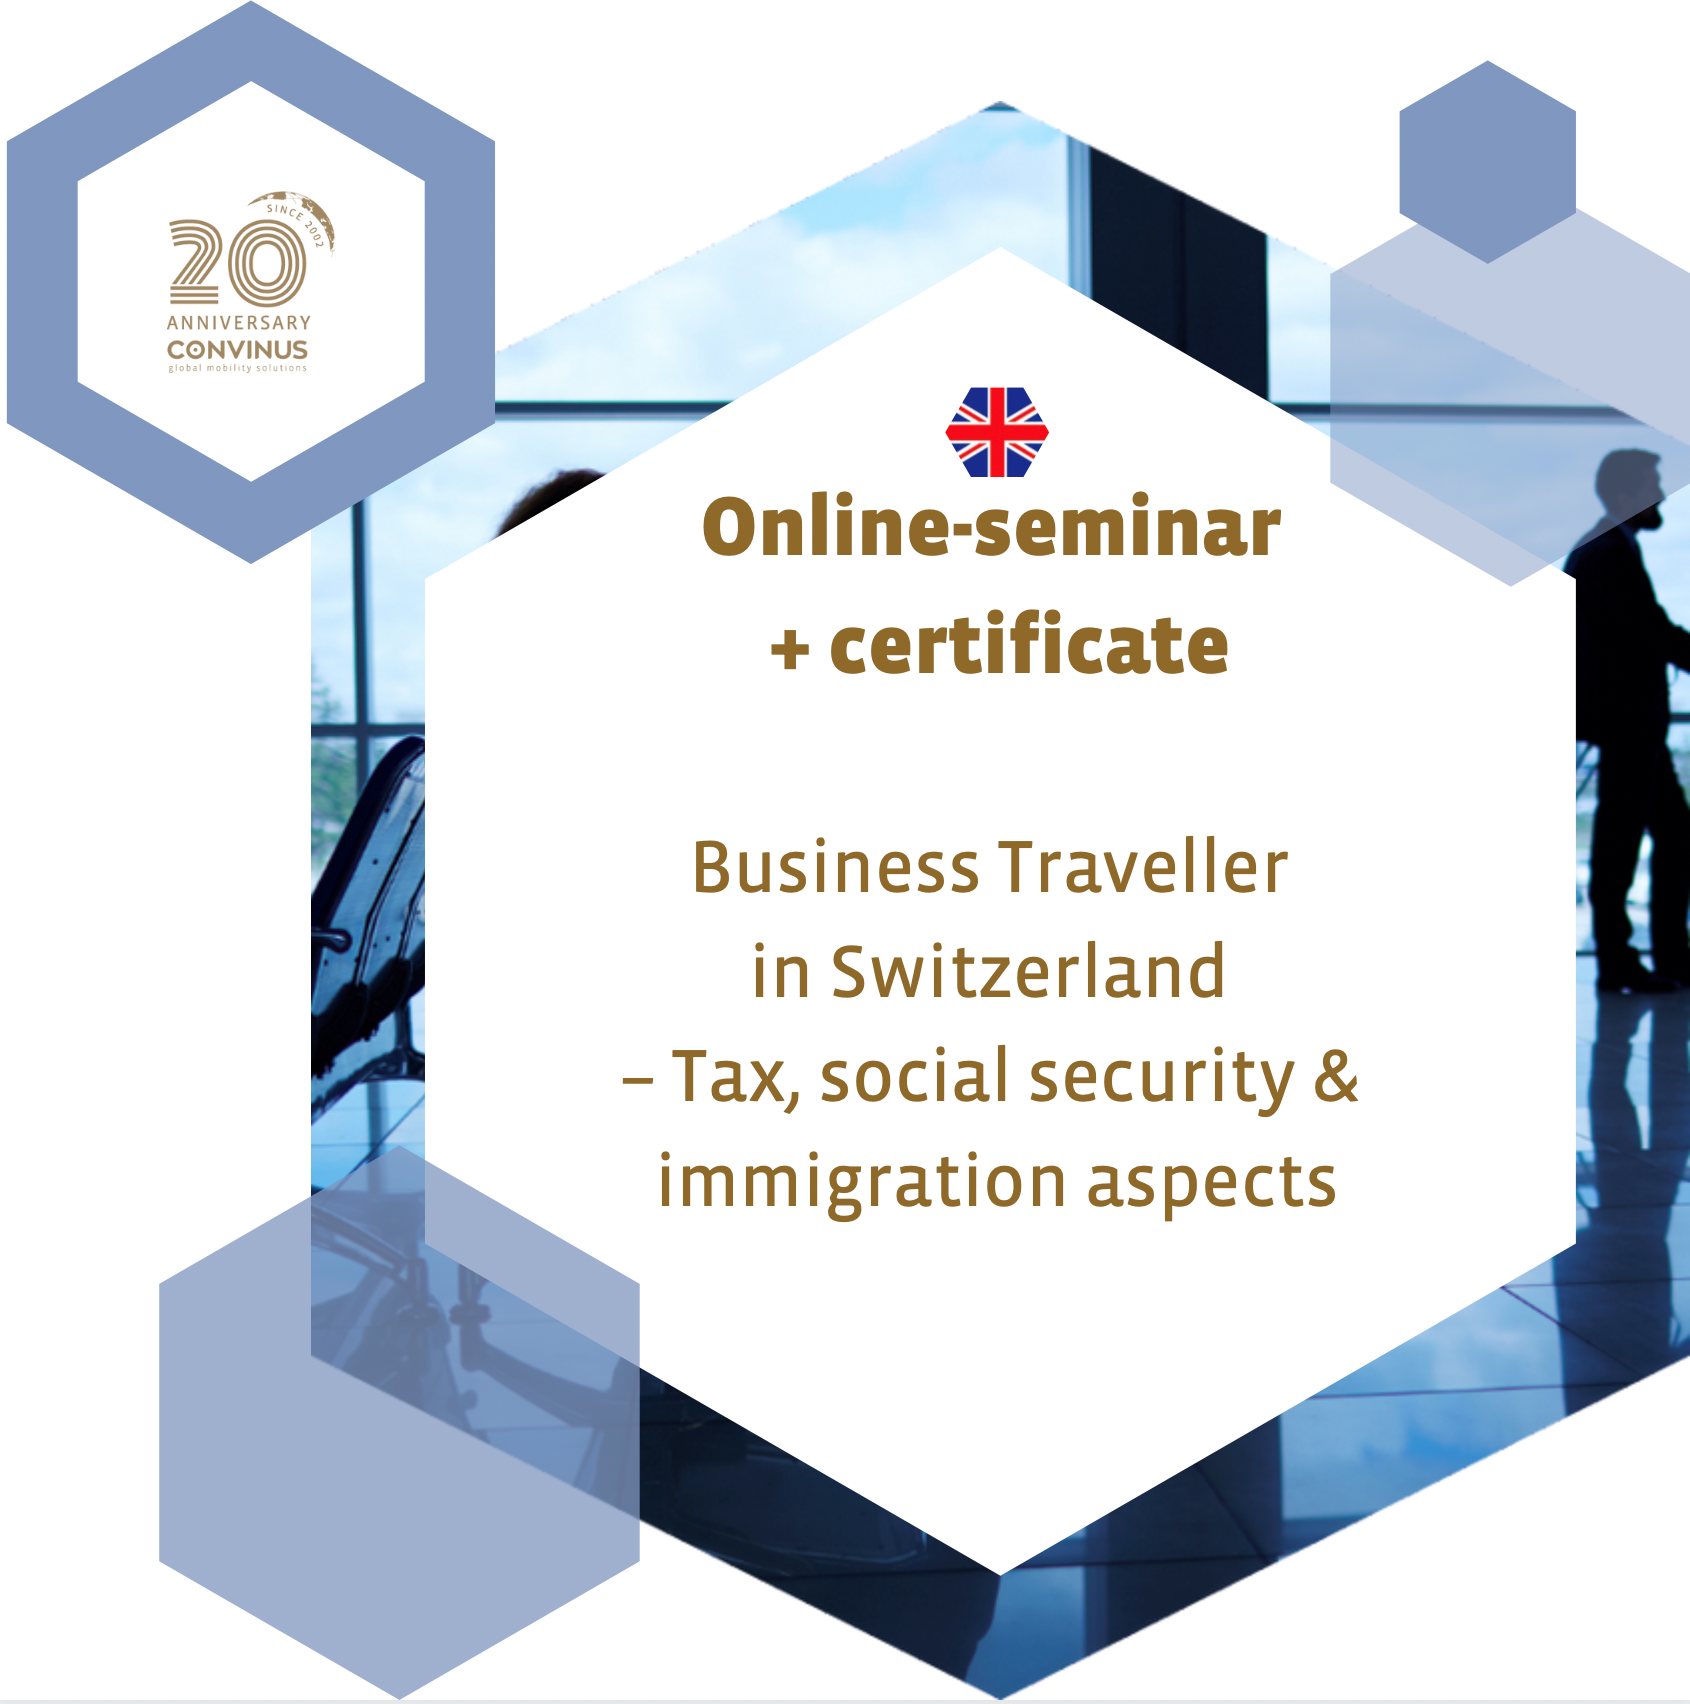 Business Traveller in Switzerland – Tax, social security & immigration aspects